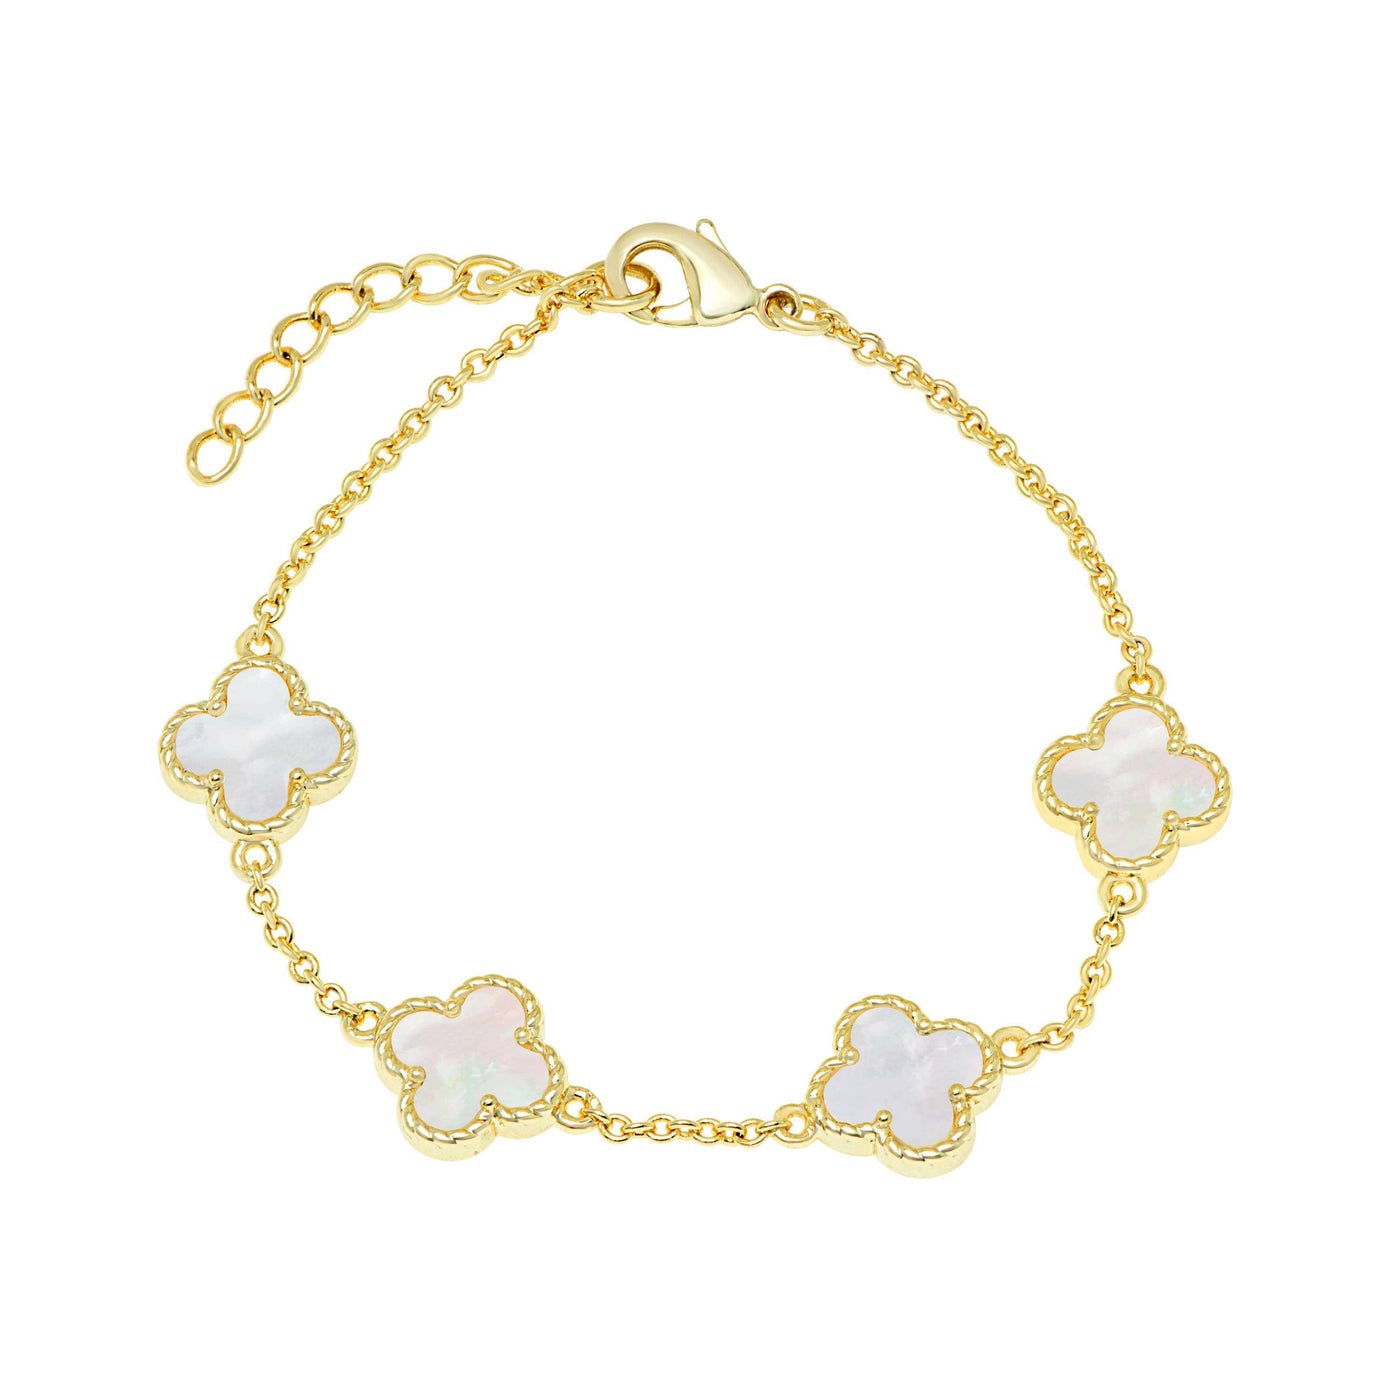 Lily Nily - Mother of Pearl Clover Bracelet